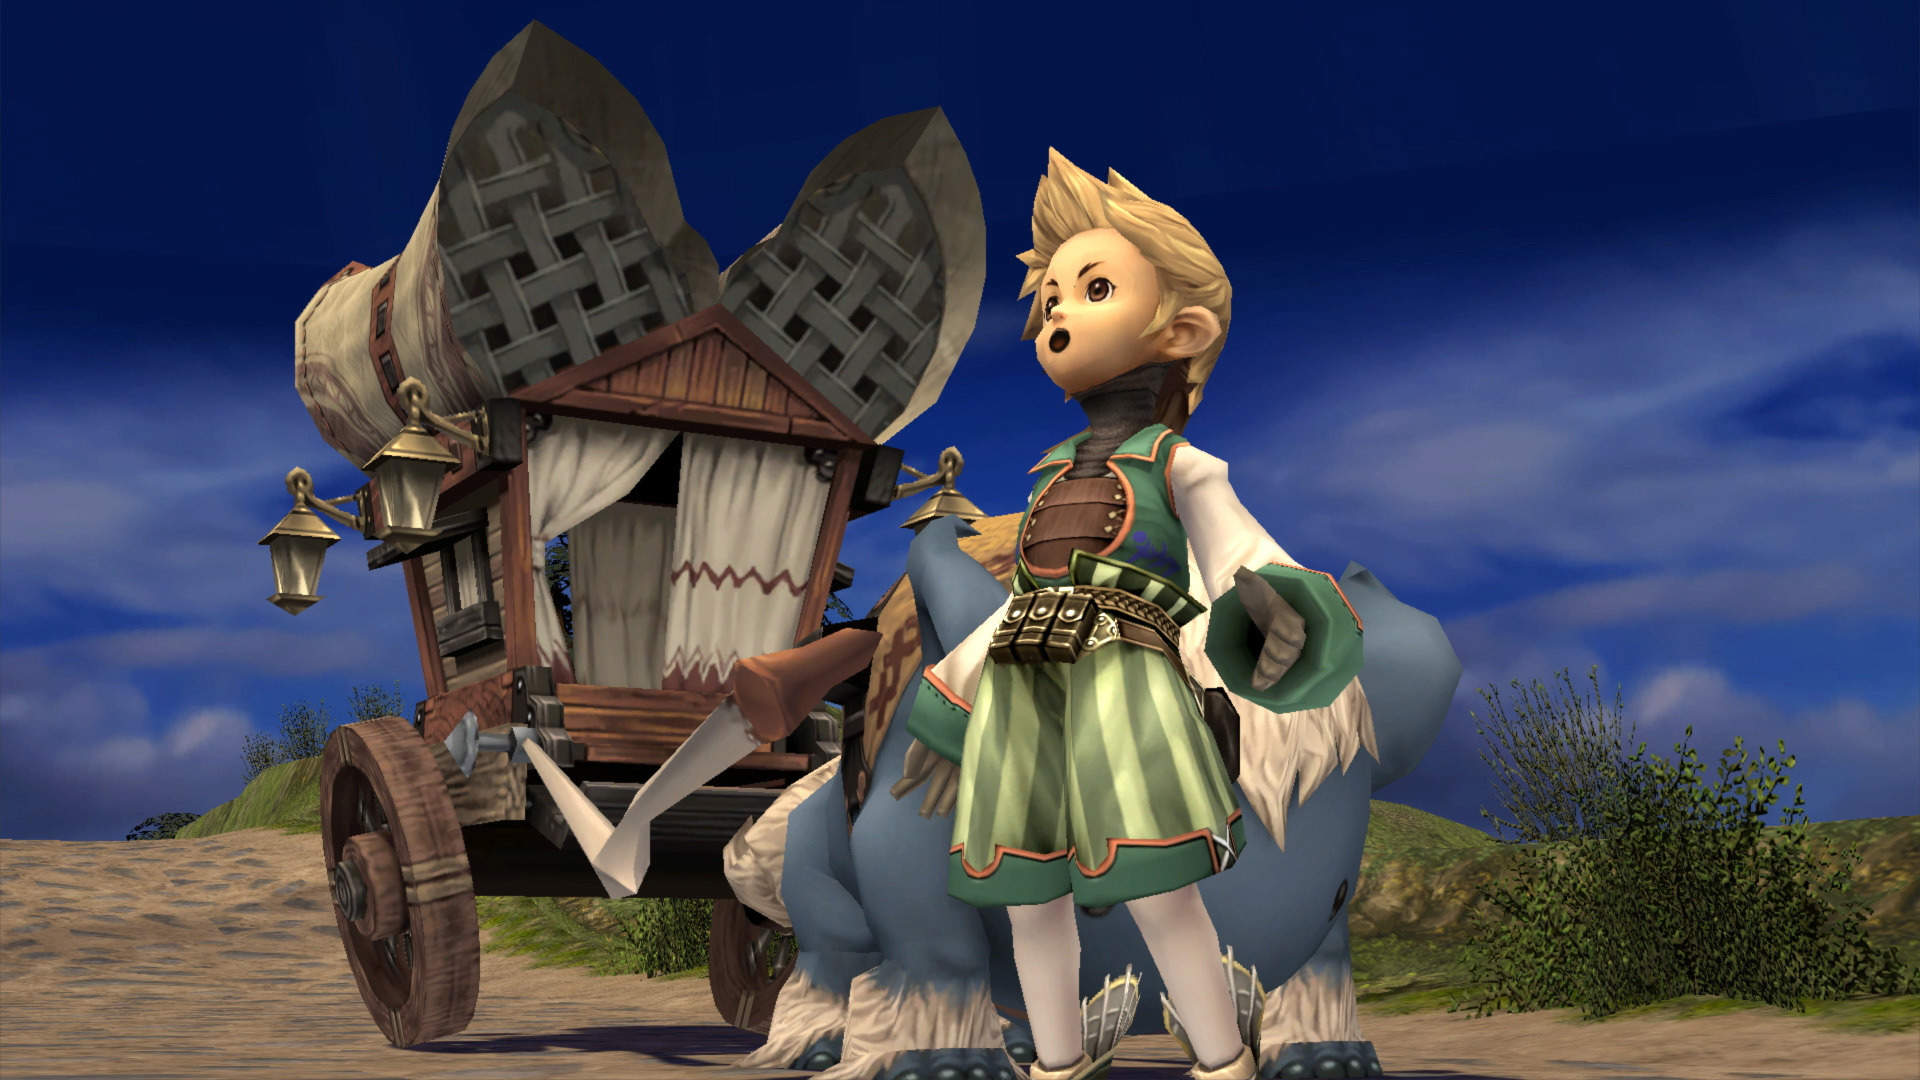 https://media.idownloadblog.com/wp-content/uploads/2020/05/Final-Fantasy-Crystal-Chronicles-Remastered-Edition-for-iOS-teaser.jpg